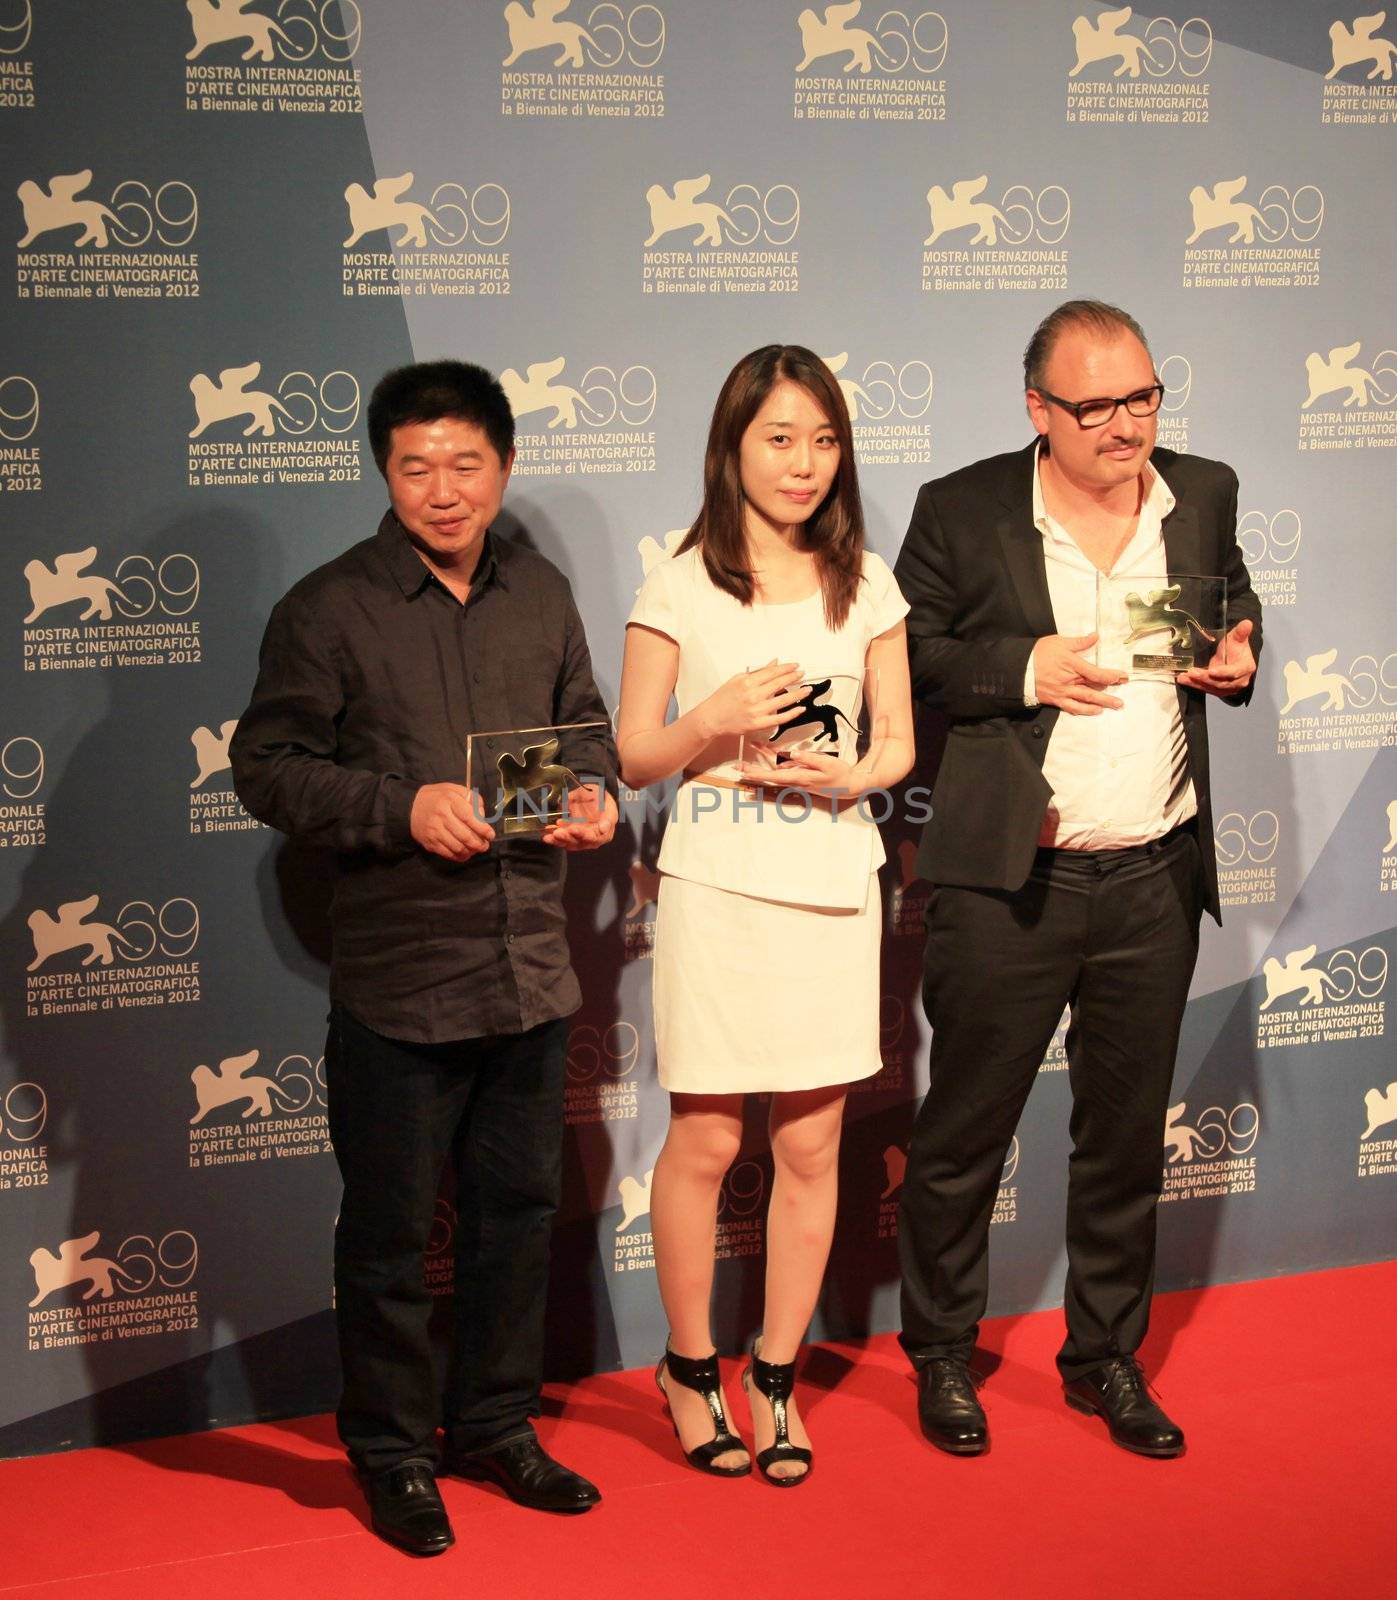 Wang Bing, Yoo Min-young and Frederic Fonteyne pose for photographers at Venice Film Festival